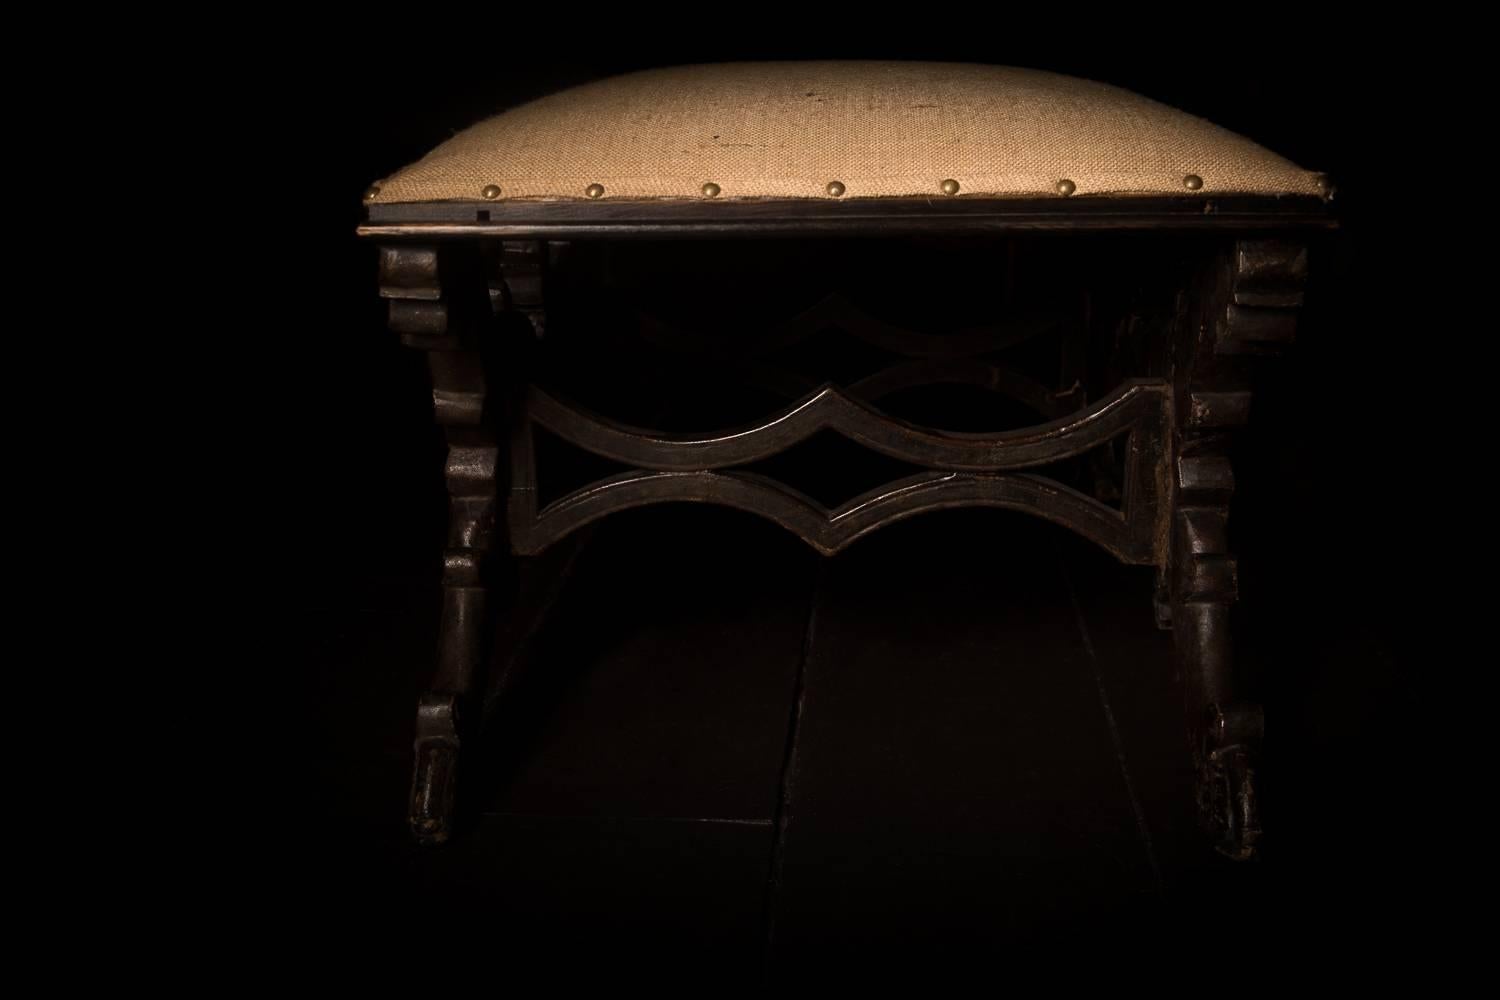 An unusual and stylish accompaniment to any setting. Hand crafted in Bareilly district in the northern Indian state of Uttar Pradesh, this stool was originally designed as an ornate stand for a laquered trunk. Featuring wonderful acanthus carving